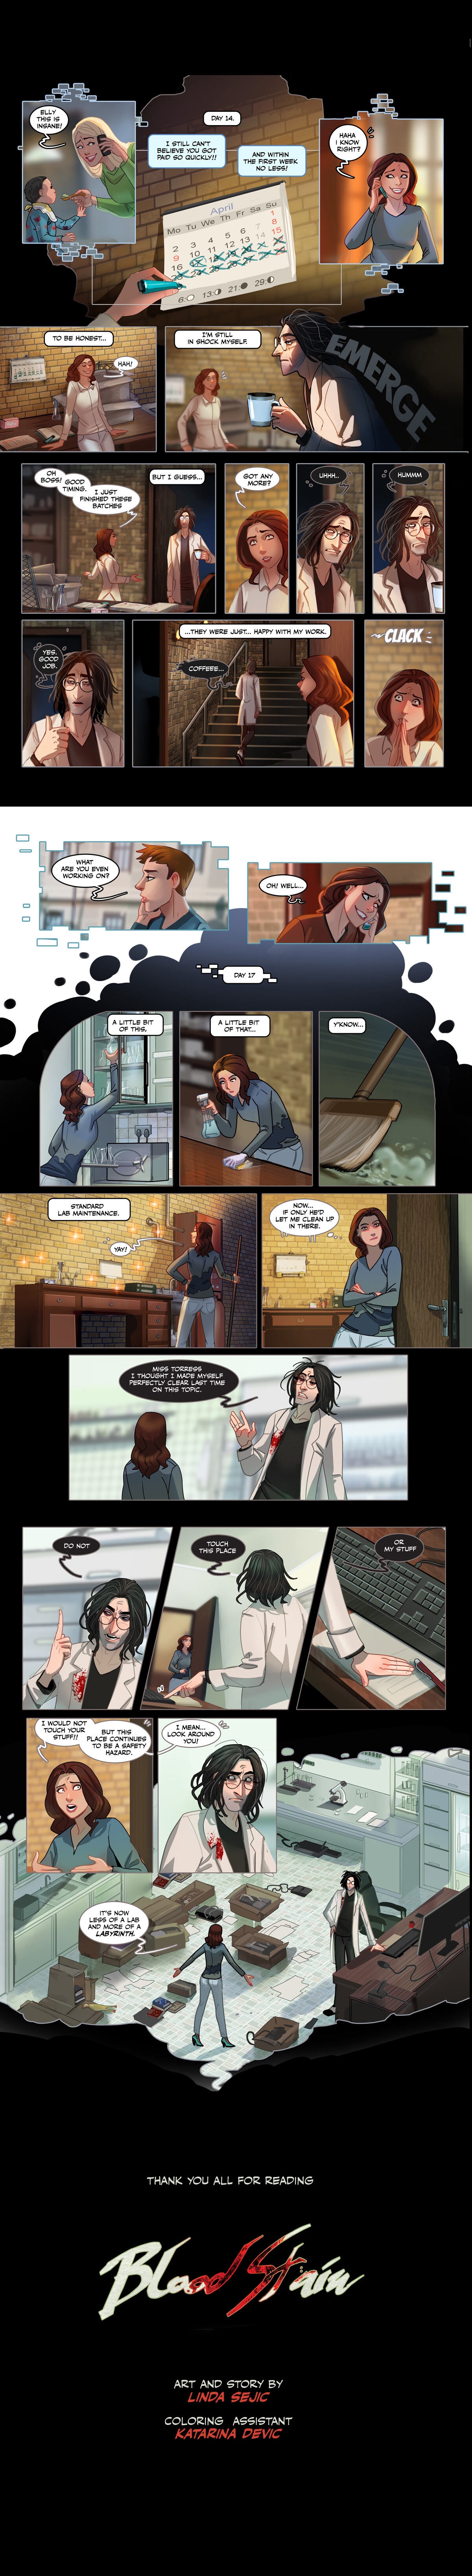 Blood Stain ch. 4 (ongoing) [Linda Sejic / Sigeel] 19